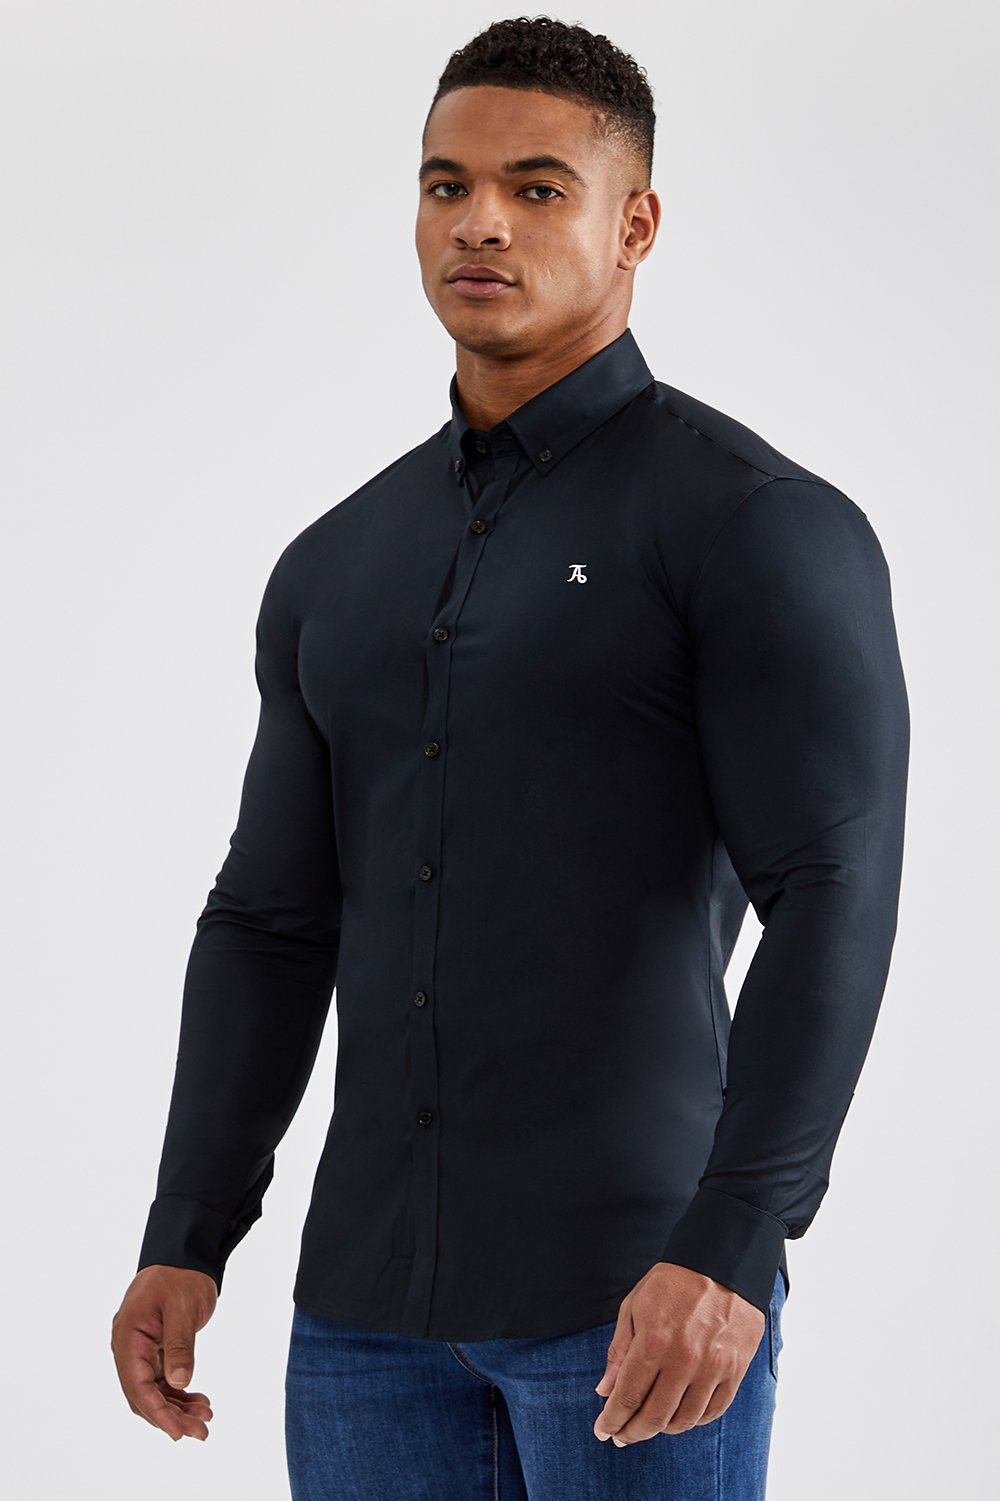 Athletic Fit Signature Shirt in Black - TAILORED ATHLETE - USA